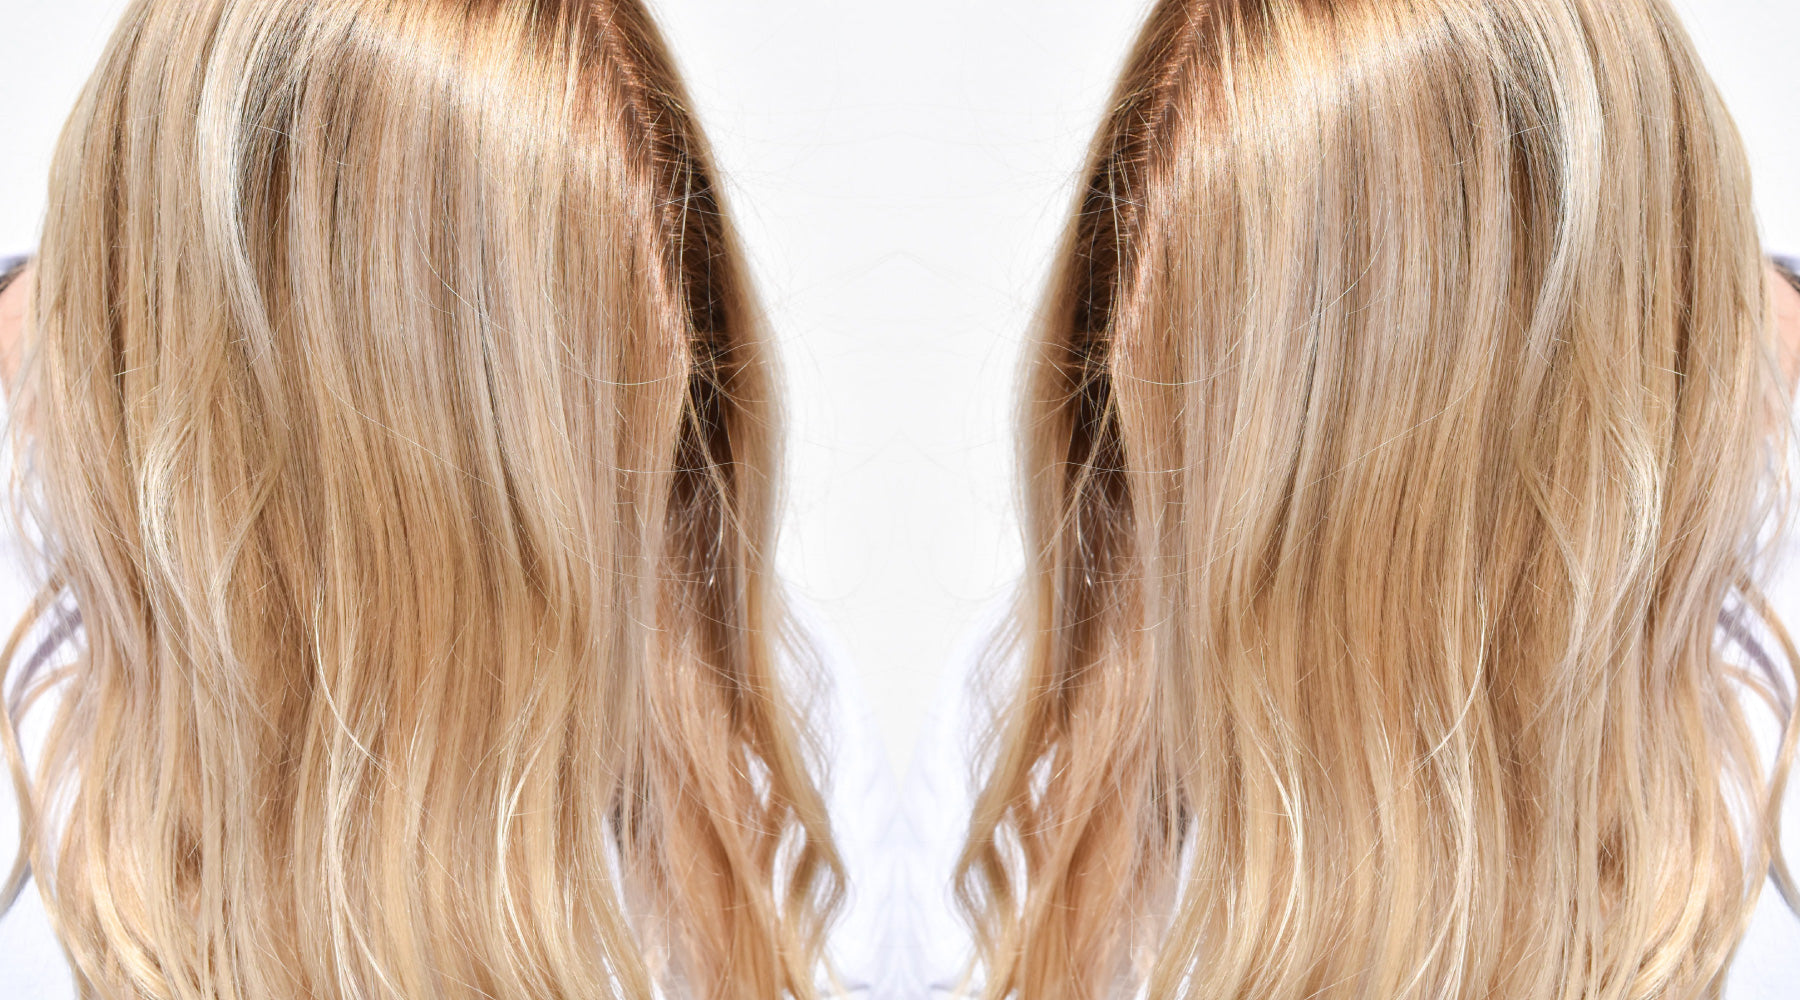 50 Blonde Highlights Ideas to Freshen Up Your Look in 2023